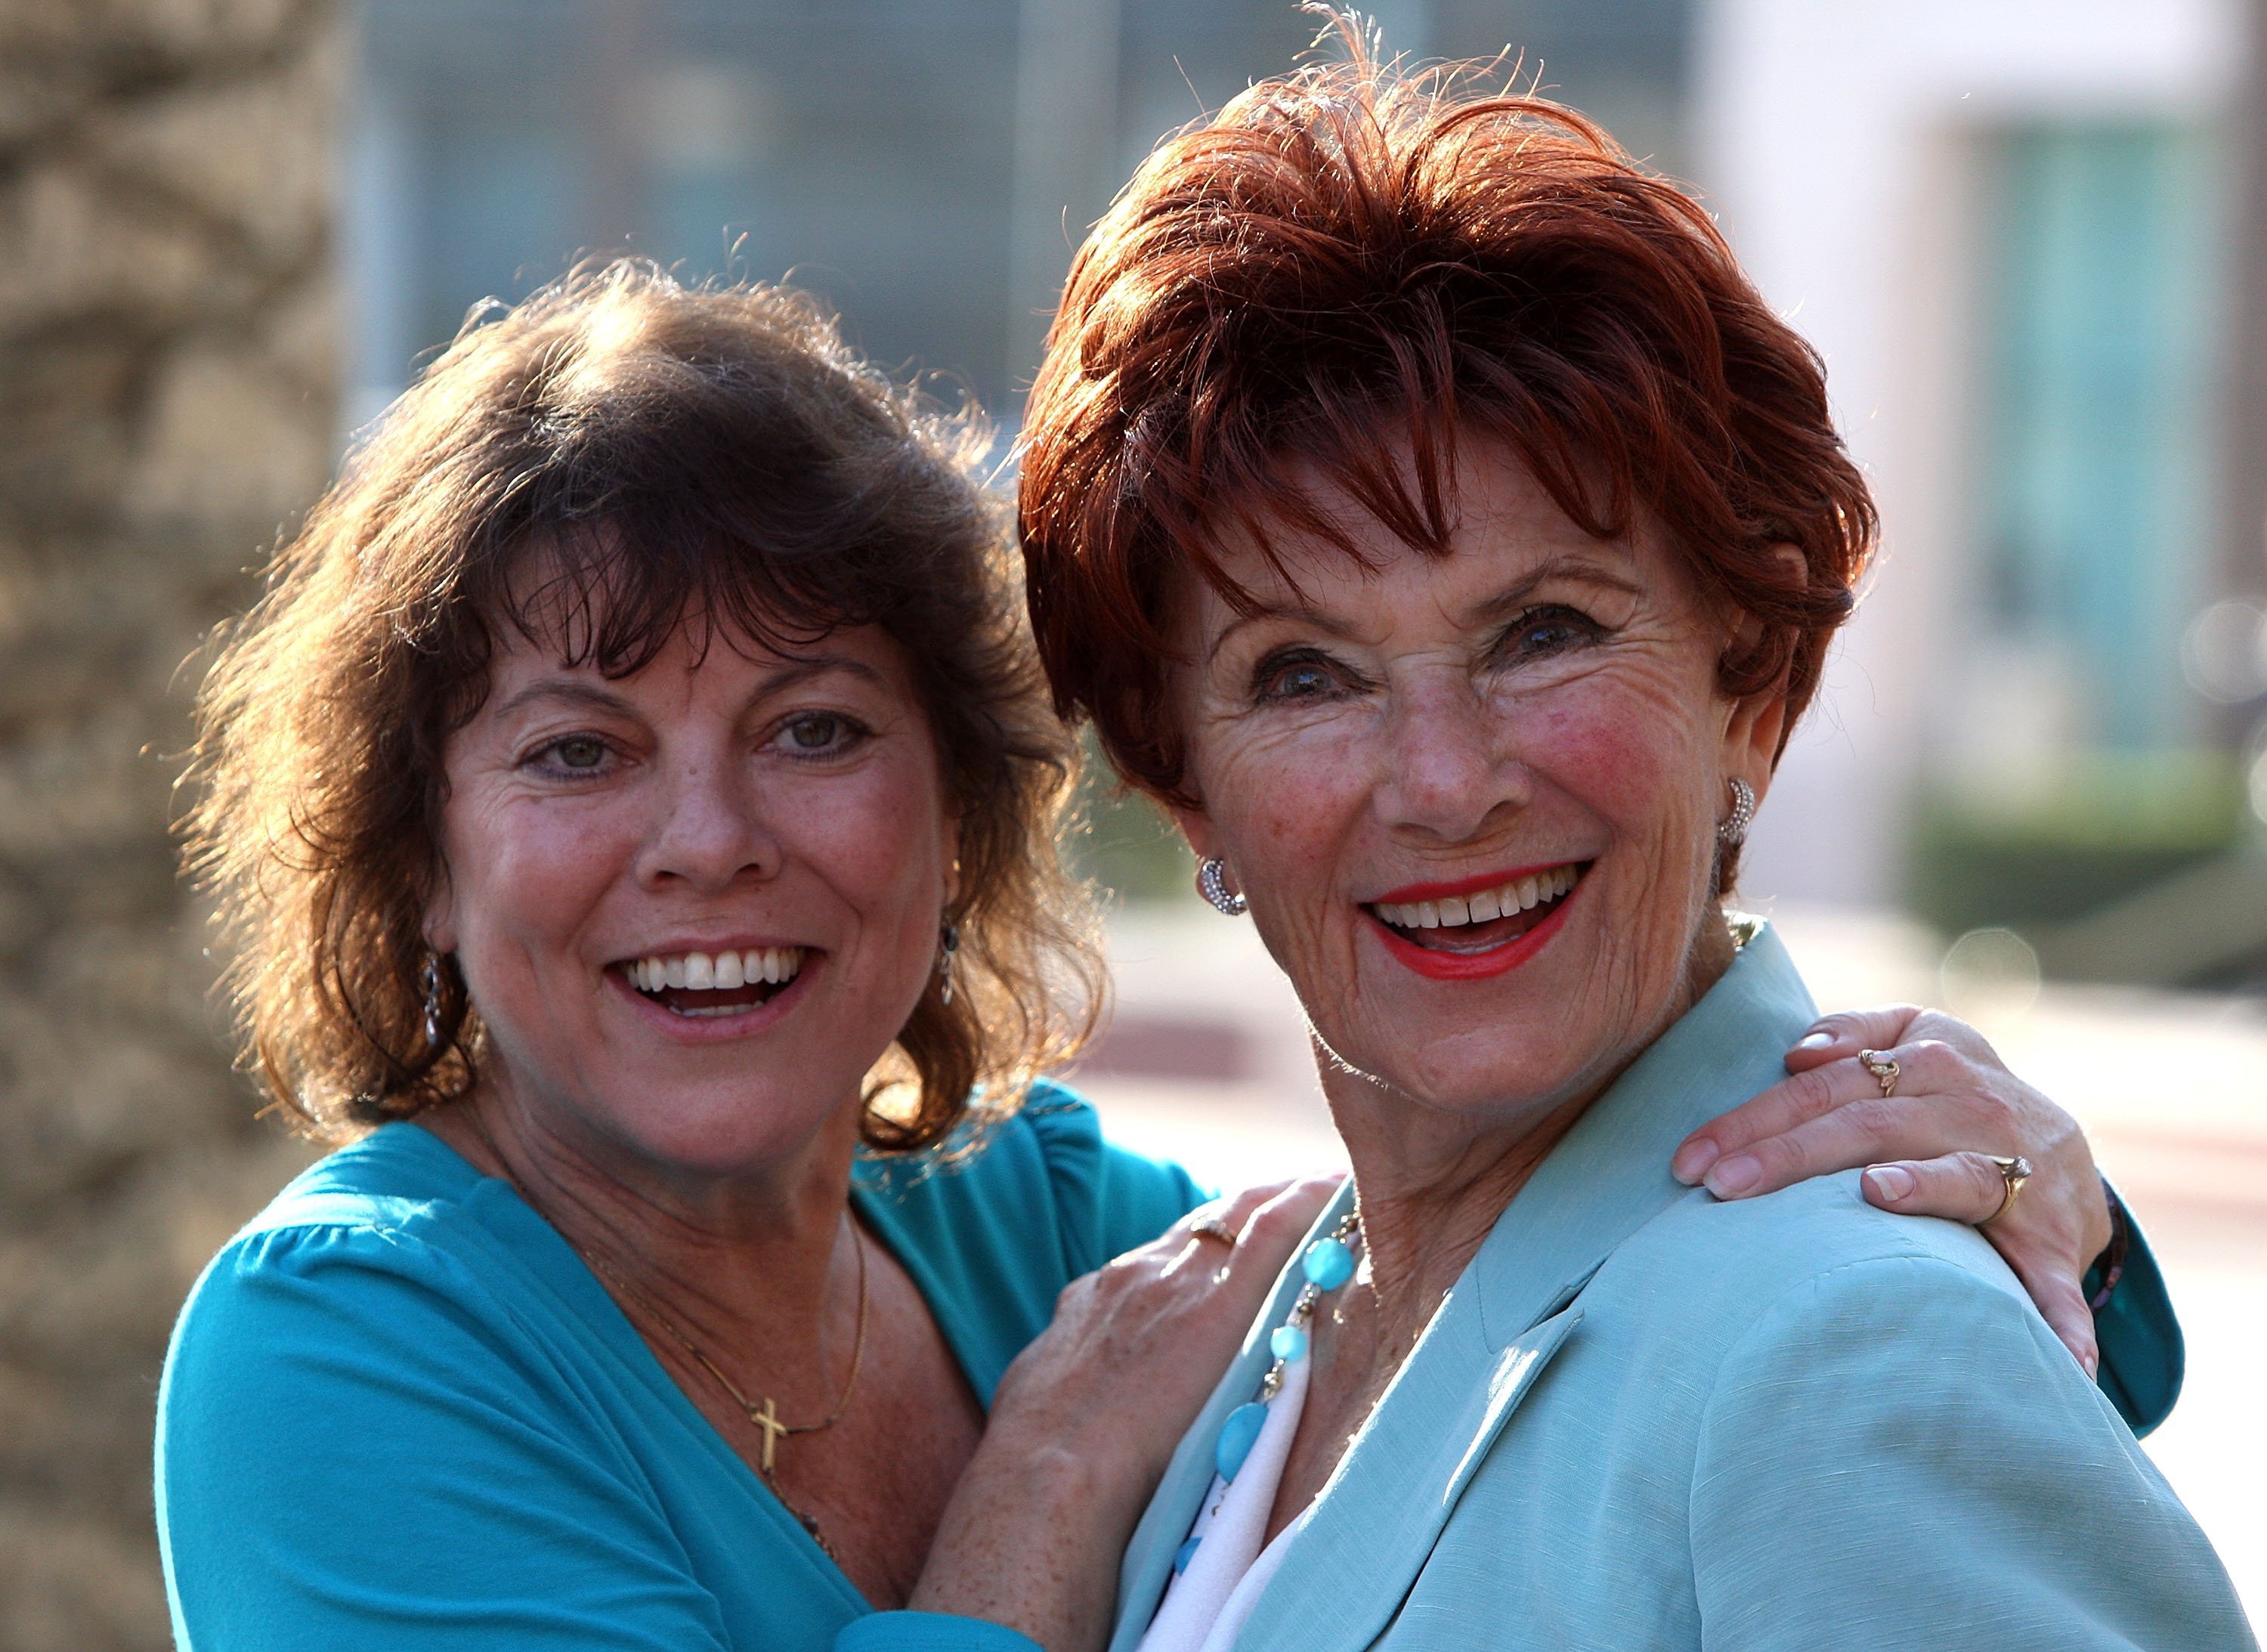 Erin Moran and Marion Ross in Hollywood in 2009. | Source: Getty Images